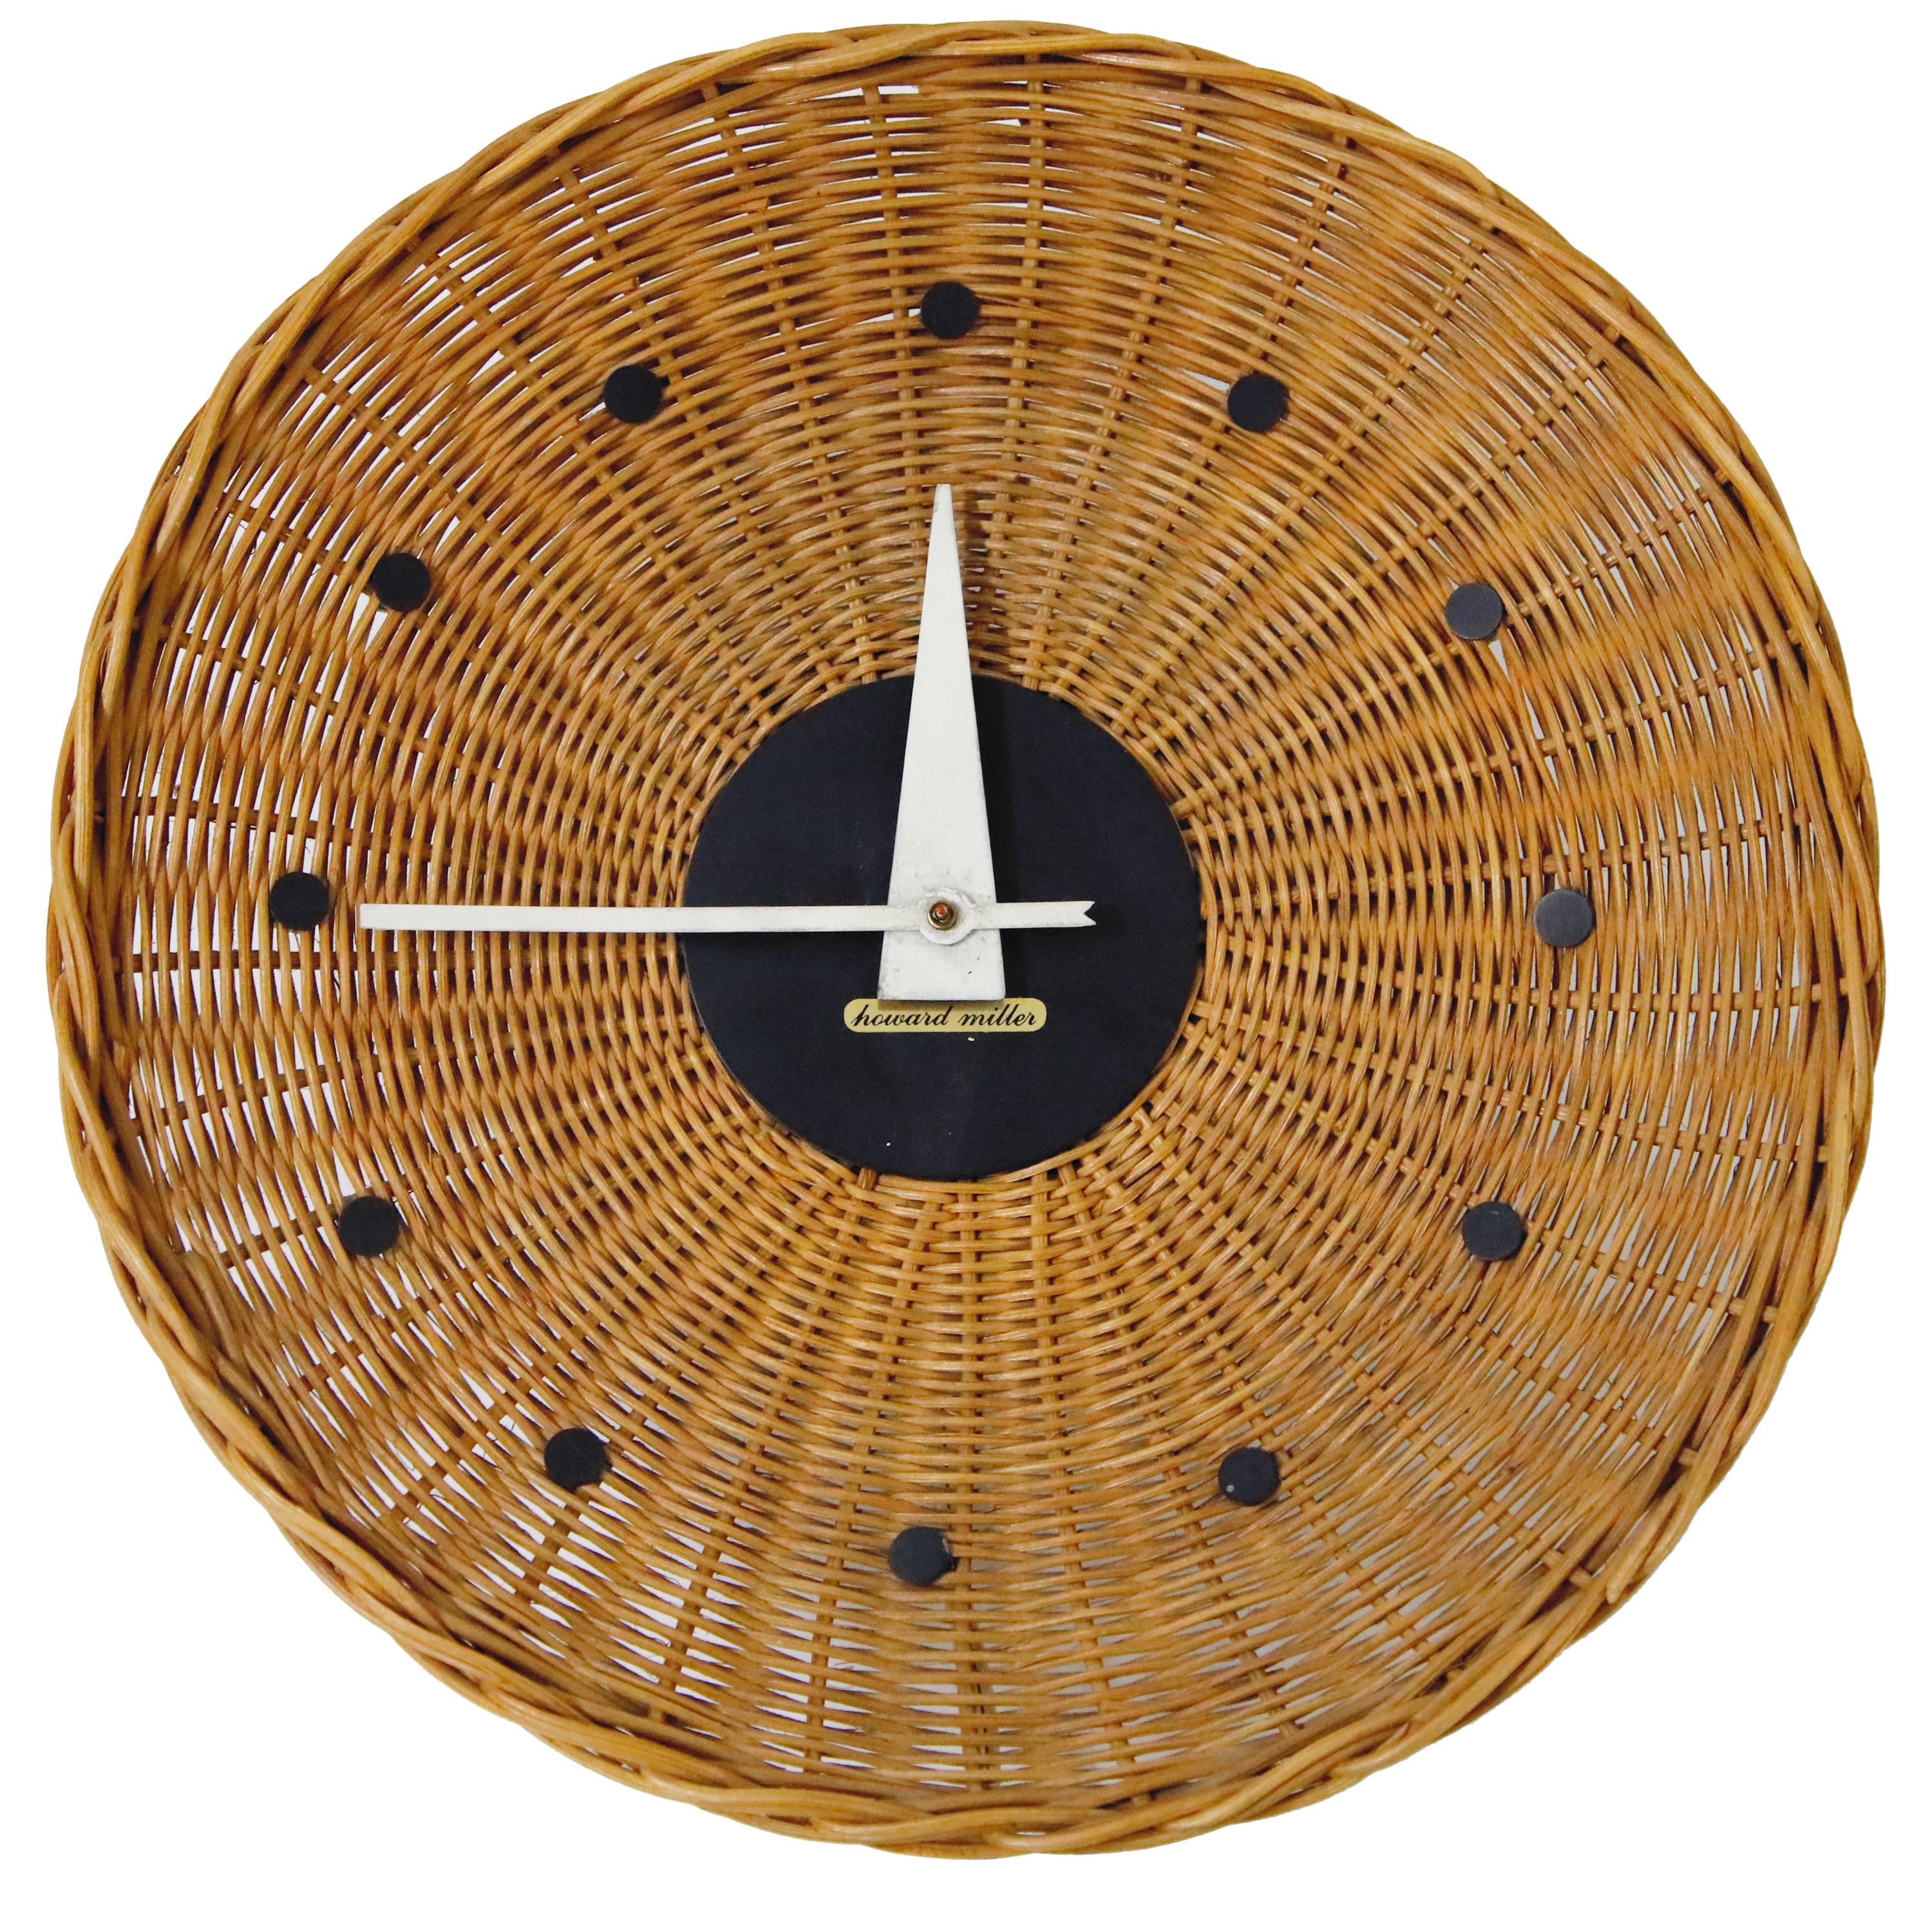 Woven Rattan 'Basket Clock' by George Nelson for Howard Miller, 1950s, Rare